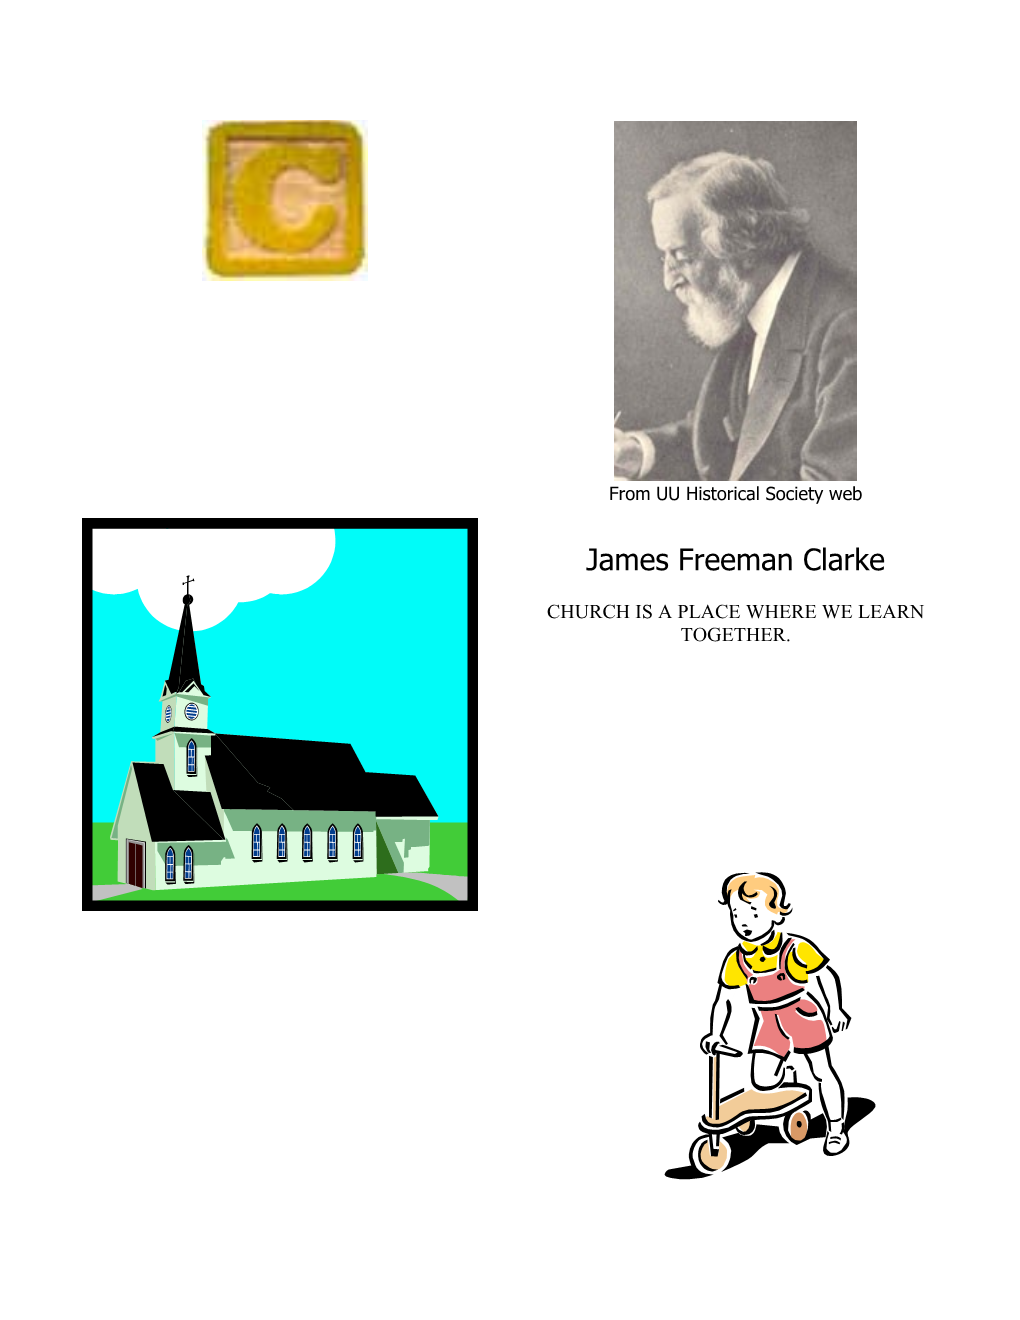 FOCUS: Letter C Introduces James Freeman Clarke, Some Basic Things About Church Structure